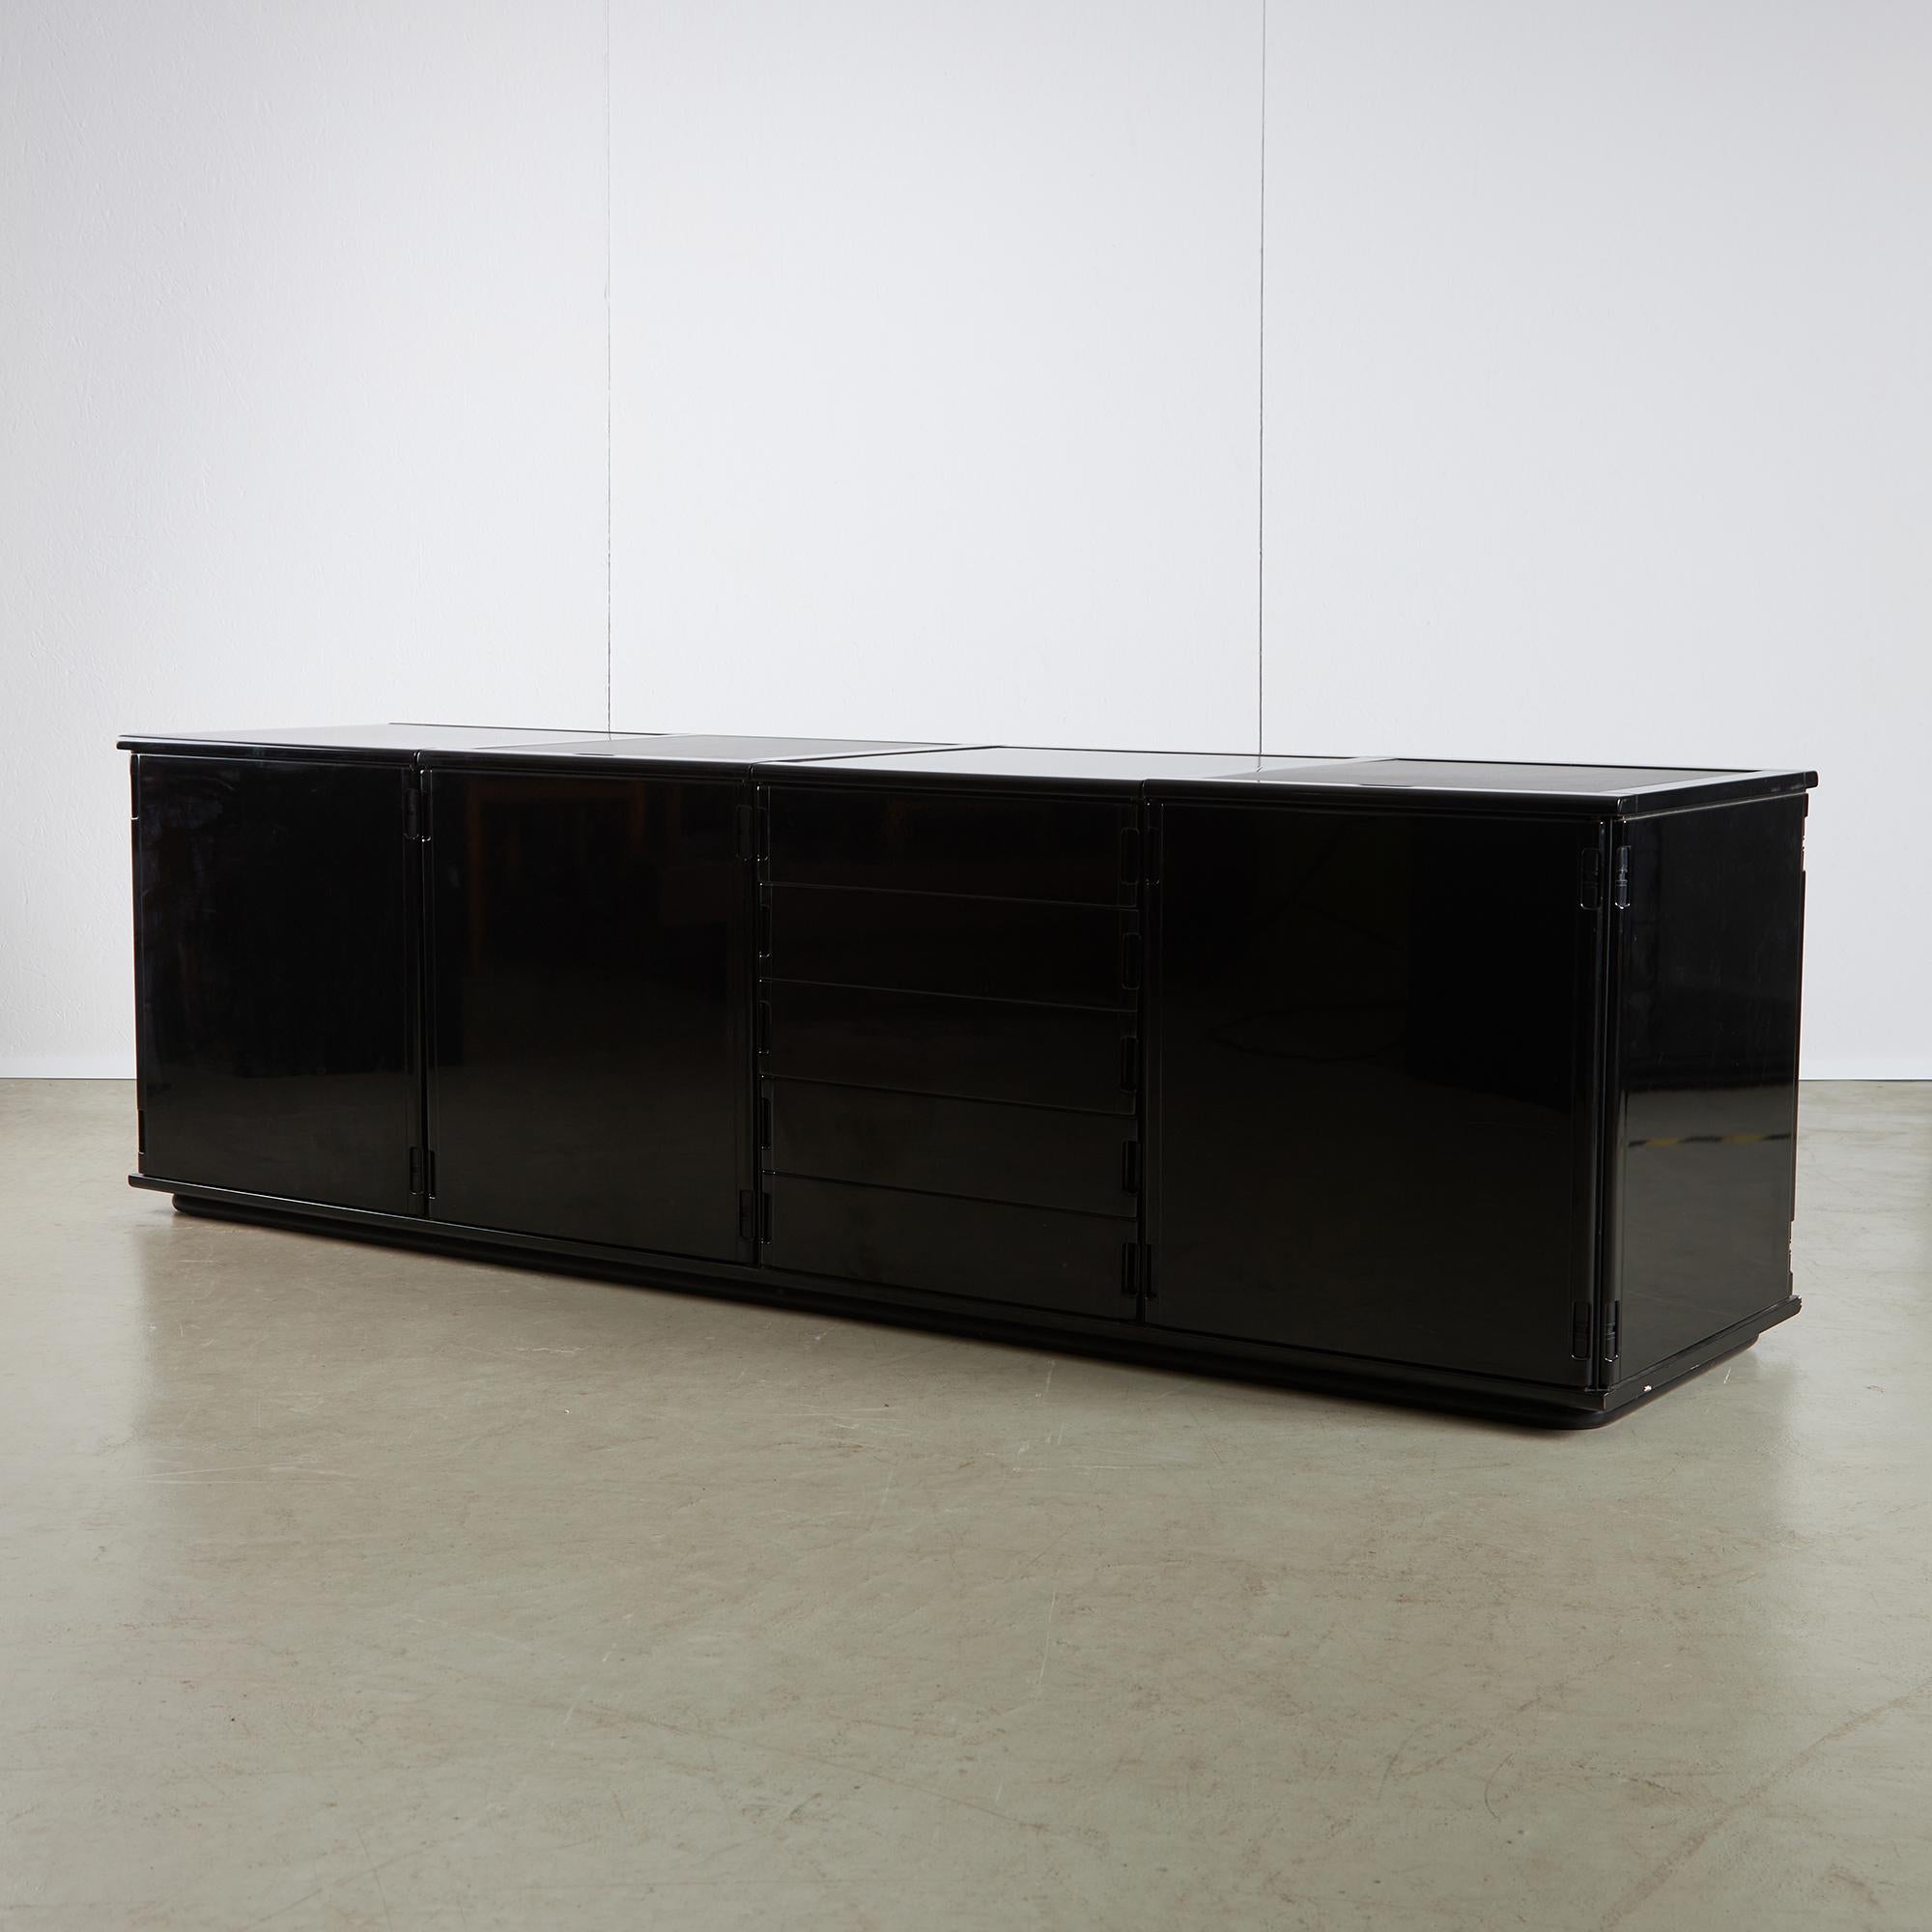 The Molteni sideboard from the rare Gianfranco Frattini Larco Series showcases a combination of black lacquer and high gloss acrylic surfaces, which are complemented by matte black panels on the top surface. This modular casegood series consists of